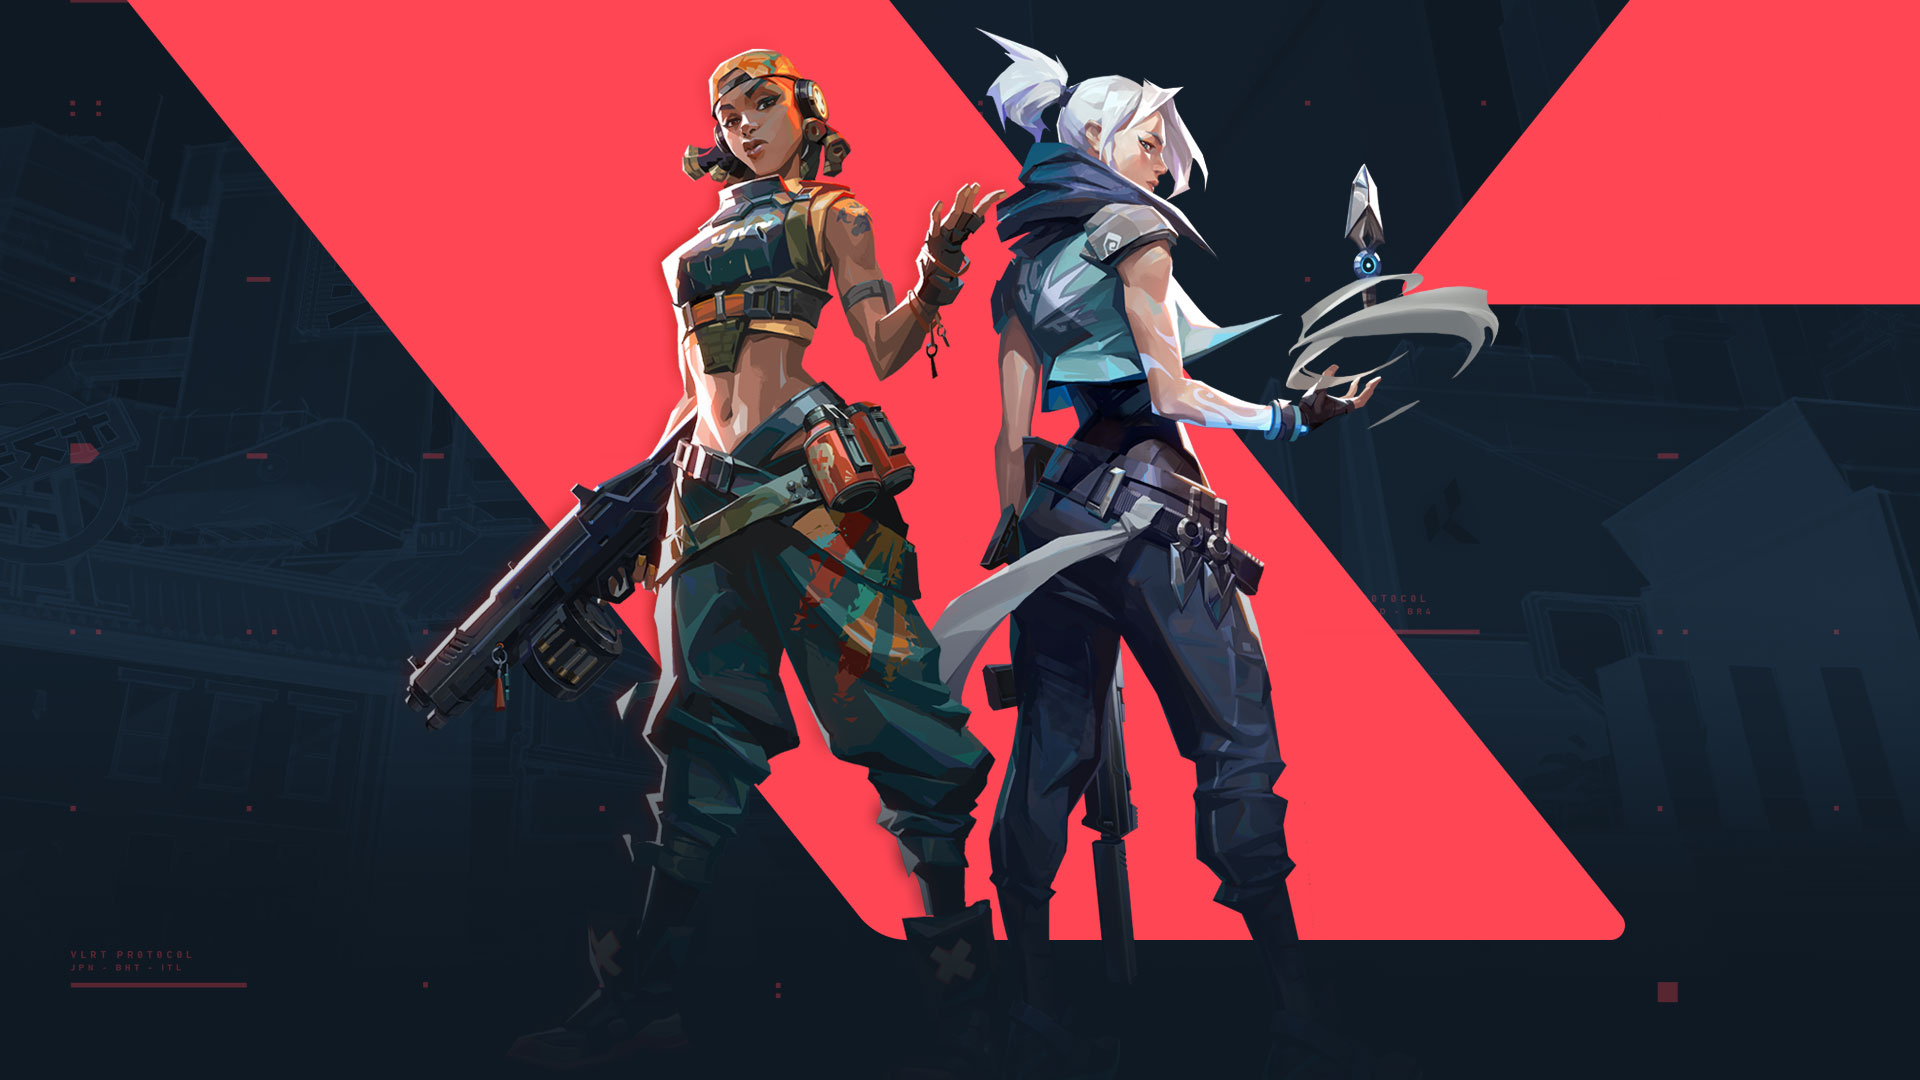 Raze and Jett from Valorant stand facing the camera with the game’s logo behind them